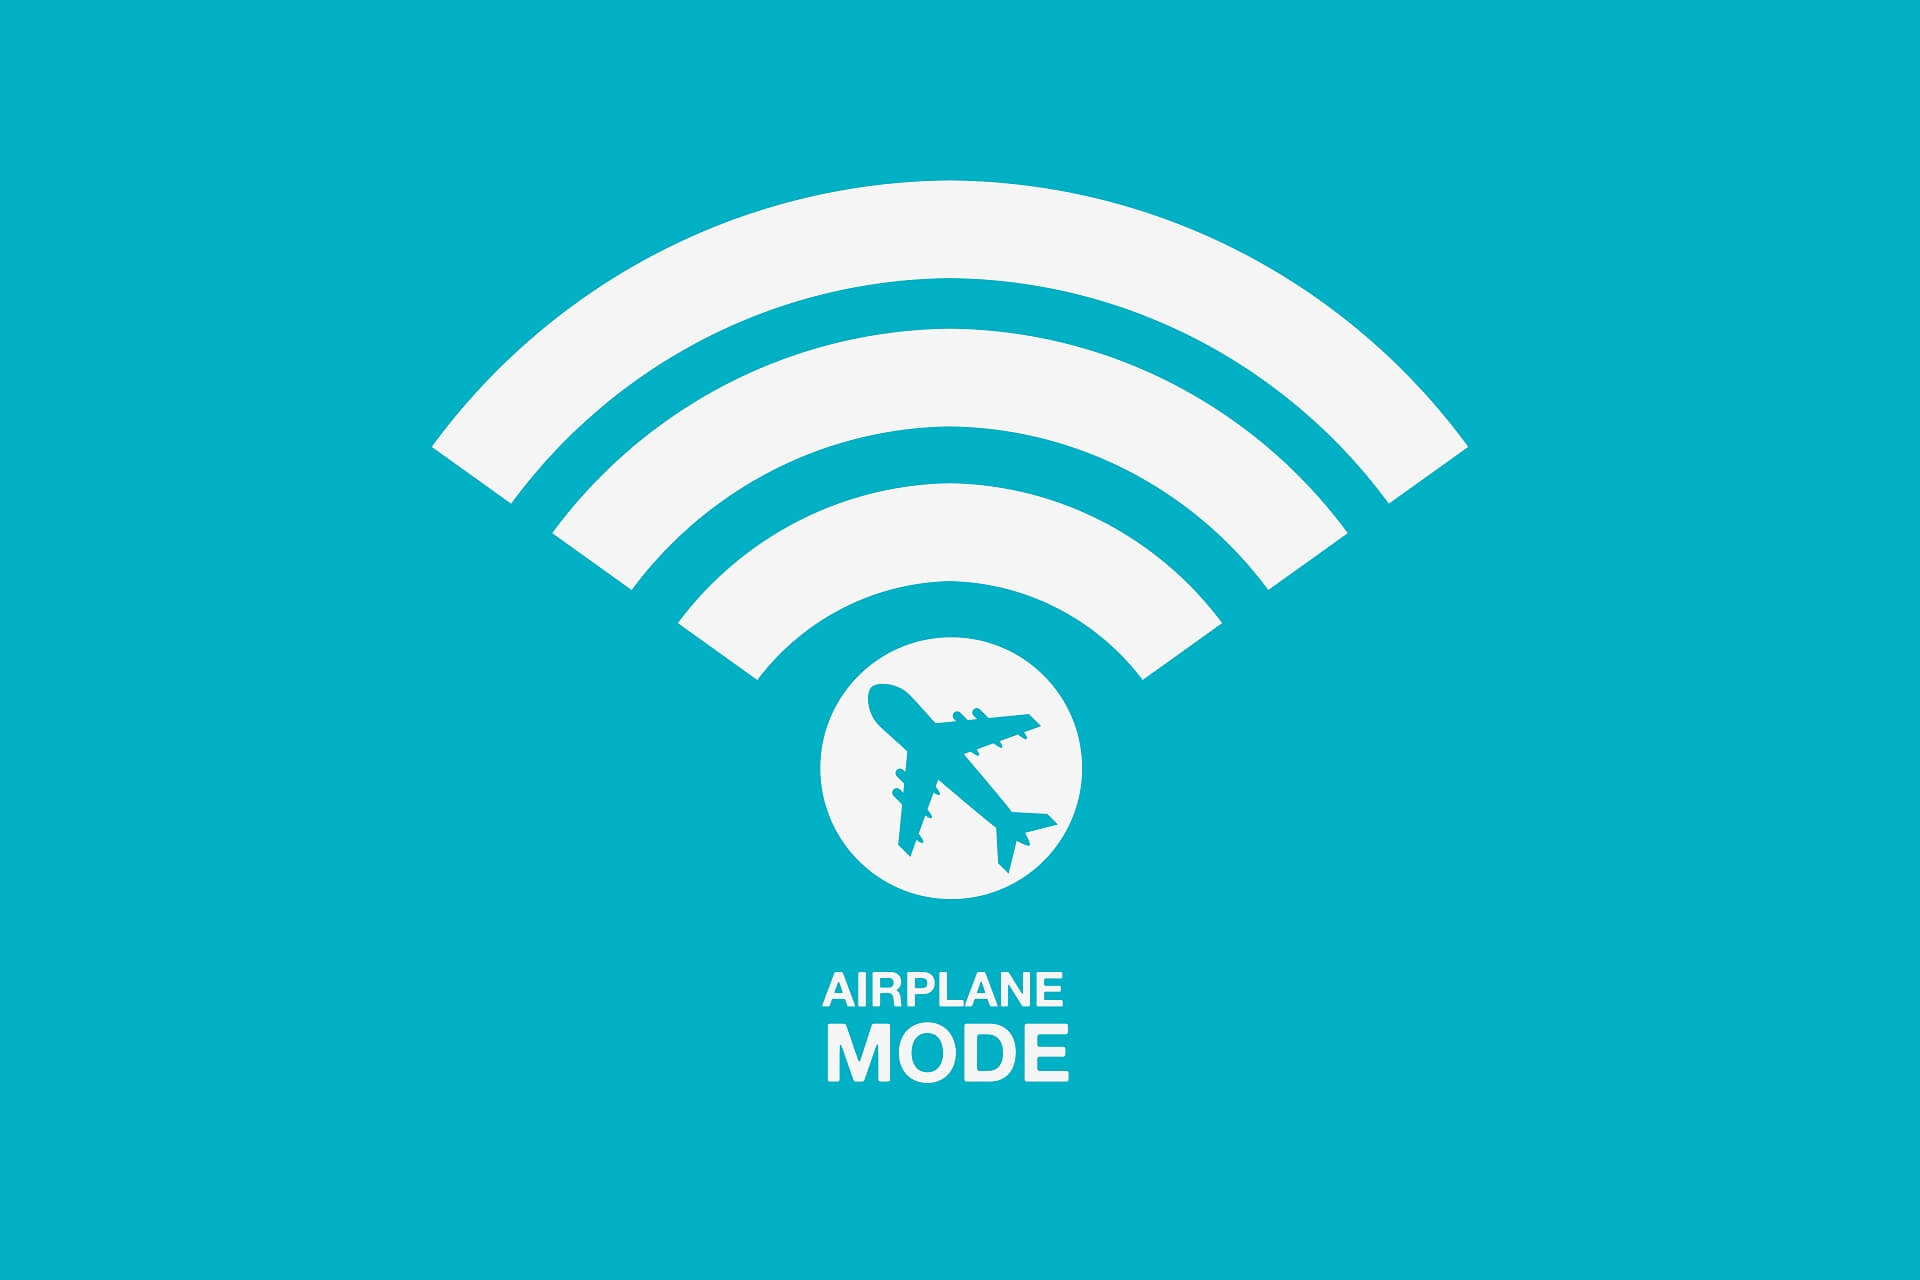 Airplane Mode issues